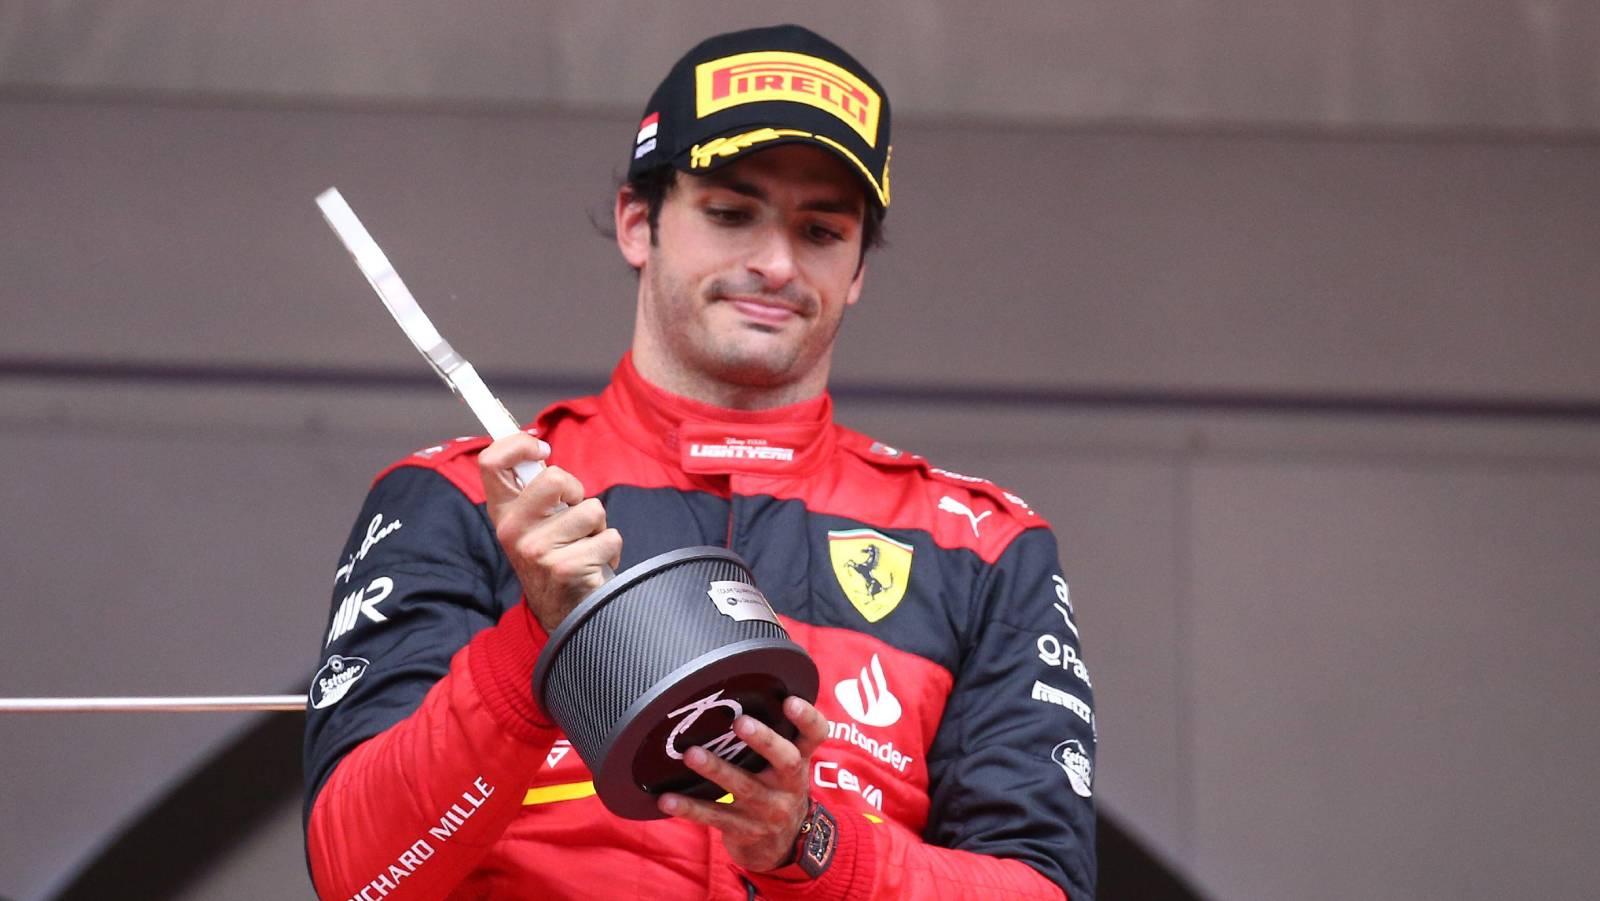 Carlos Sainz looking disappointed on the podium. Monaco May 2022.